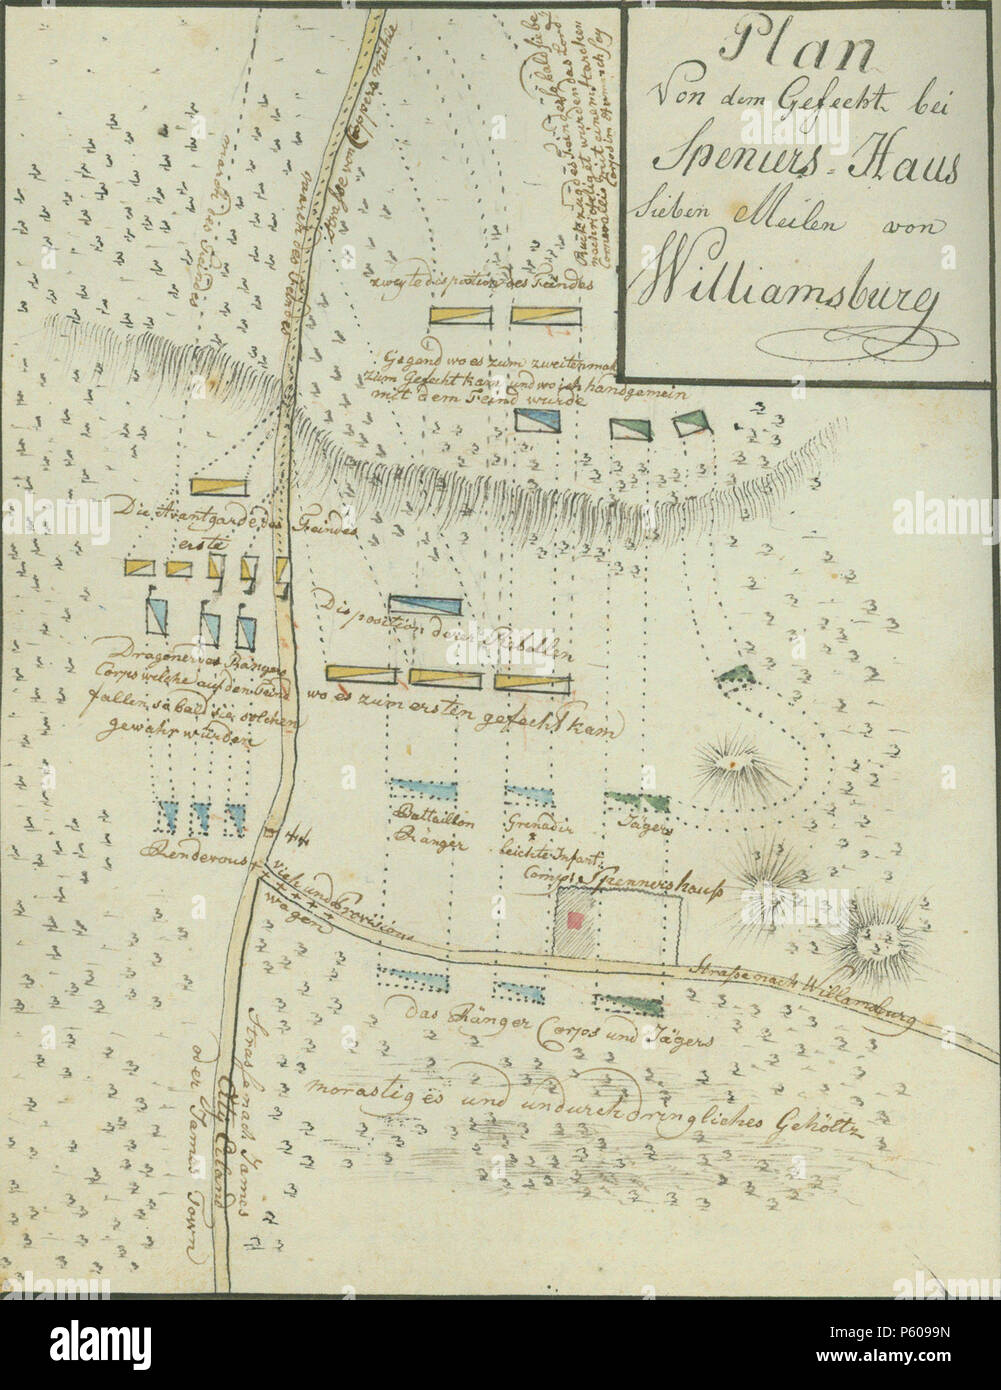 N/A. A German map depicting the action at the Battle of Spencer's Ordinary. The caption reads 'Plan von dem Gefecht bei Spensers Haus Sieben Meilen von Williamsburg', or 'Plan of the battle at Spencer's House Seven Miles from Williamsburg'. American positions are in blue, British positions in yellow. 1781. Johann Ewald (1744-1813) 537 Ewald SpencersOrdinary 1781 Stock Photo